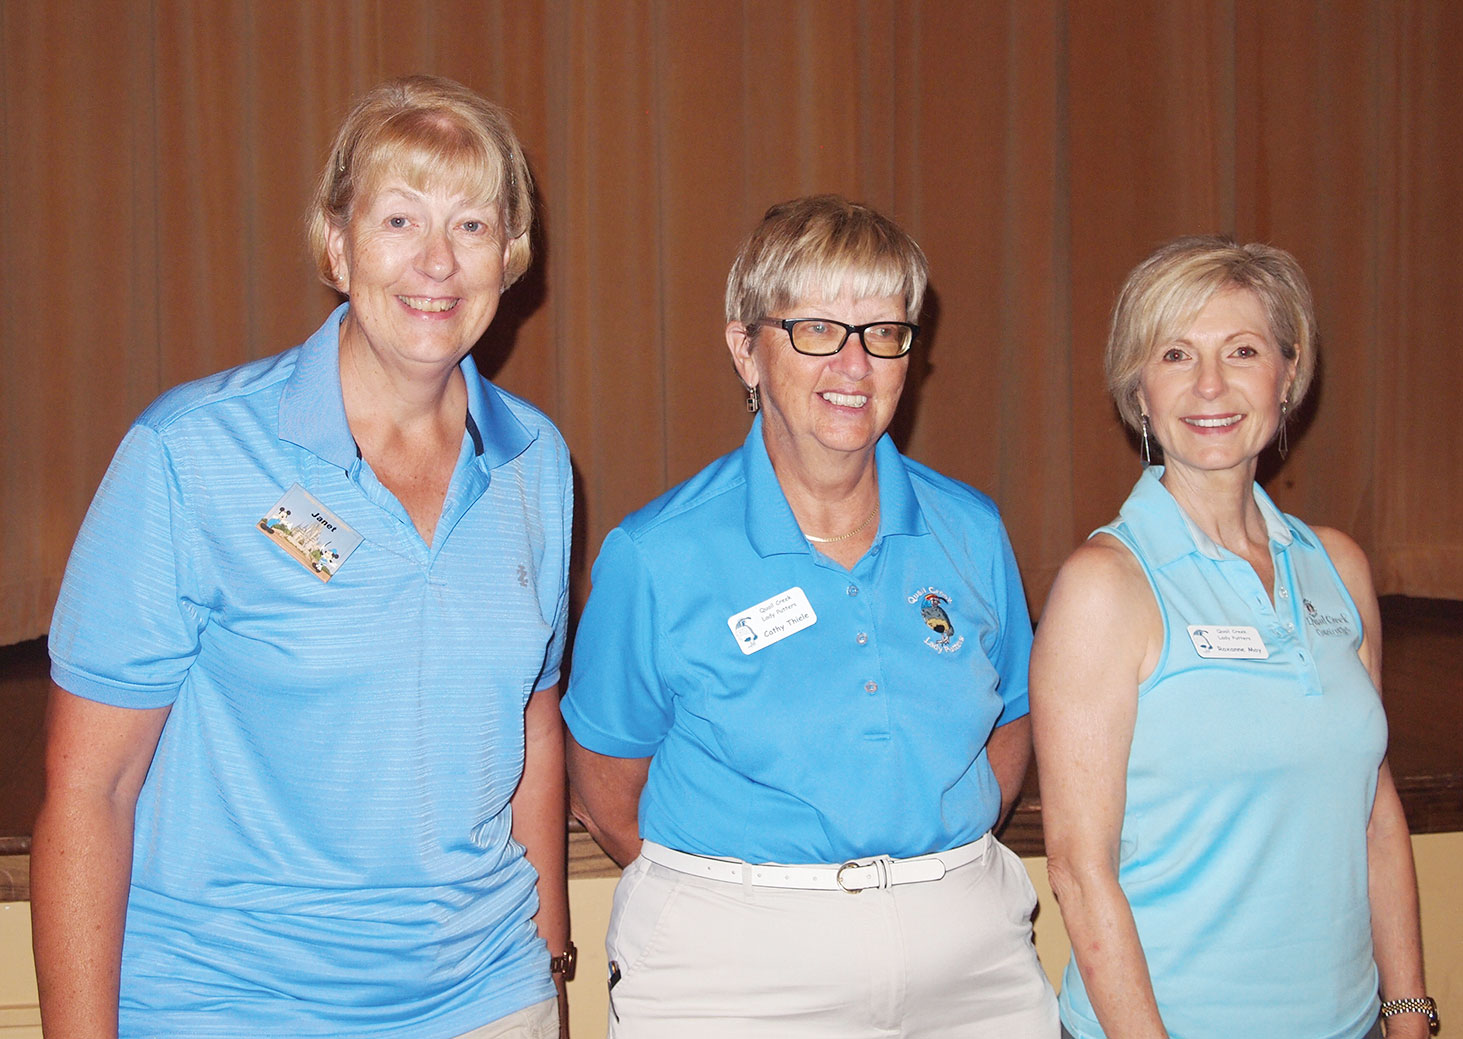 Cathy Thiele, (center) joins Janet Wegner (left) and Roxanne May who recently scored under 40 for the first time; photo by Sylvia Butler.